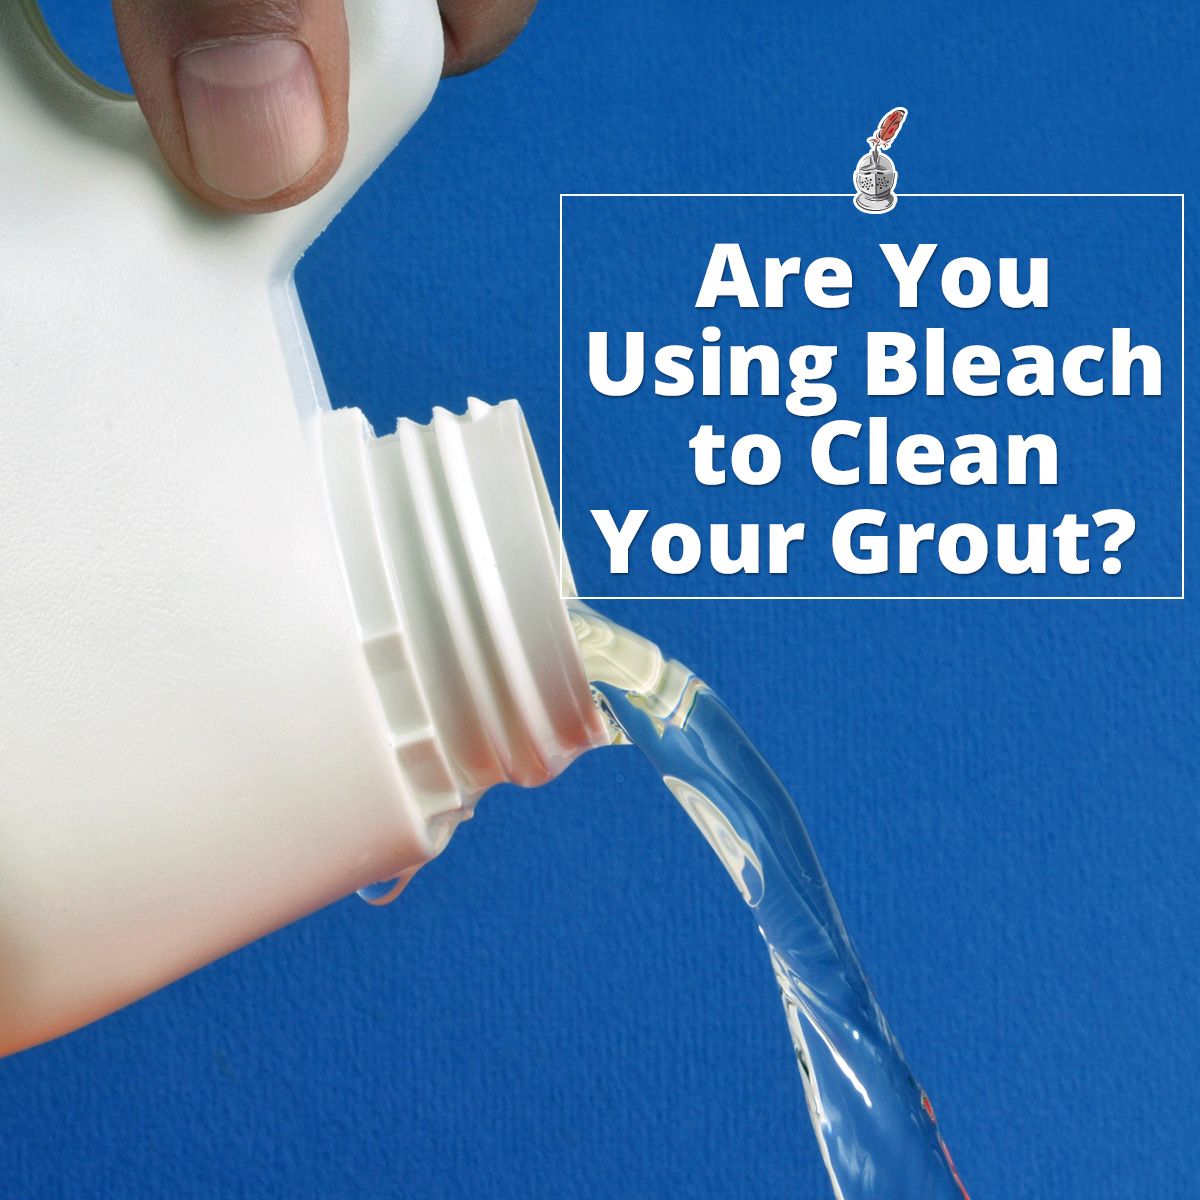 Are You Using Bleach to Clean Your Grout?